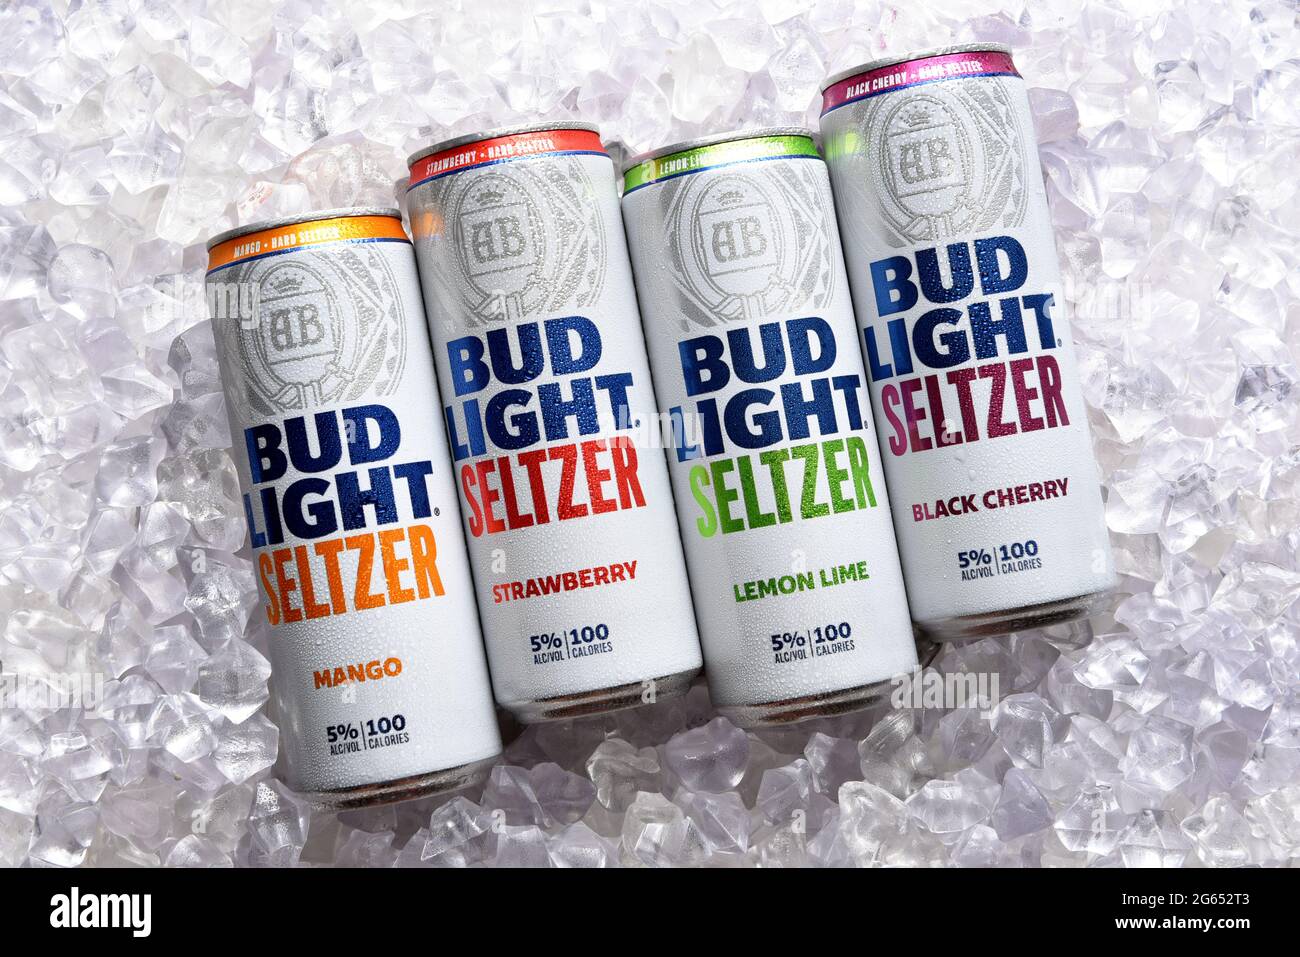 IRIVNE, CAIFORNIA - 2 JULY 2021: Bud Light Seltzer. Four cans, Lemon Lime, Mango, Strawberry and Black Cherry flavors in a bed of ice. Stock Photo